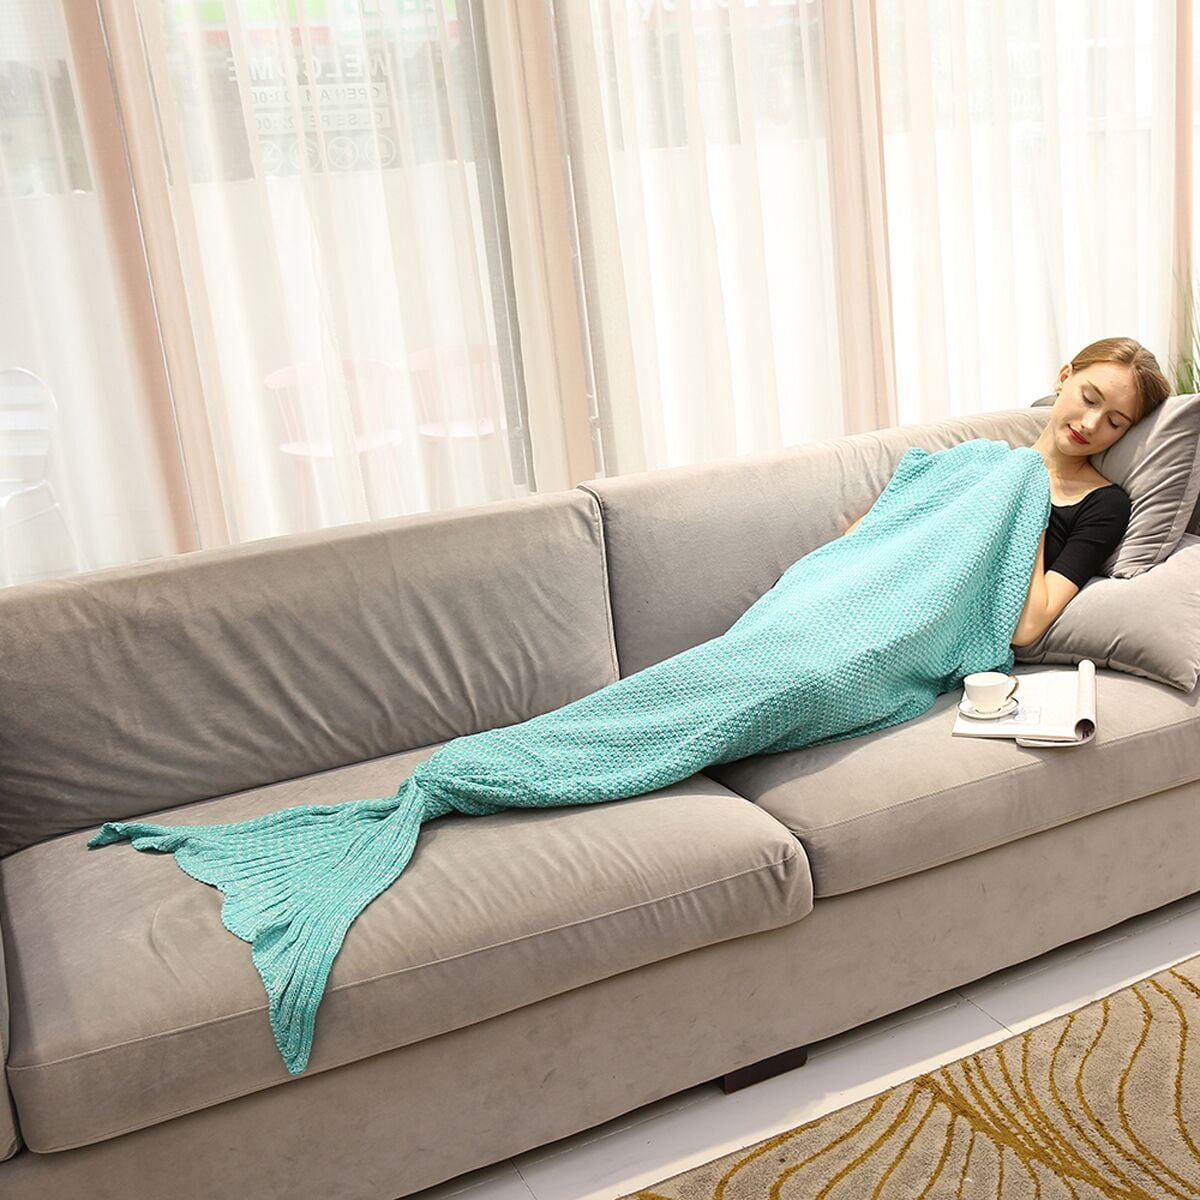 Warm and Soft Cozy Mermaid Tail Living Room Blanket Sofa Throw Couch Sleeping Bag for Kids Adult Teens Pink